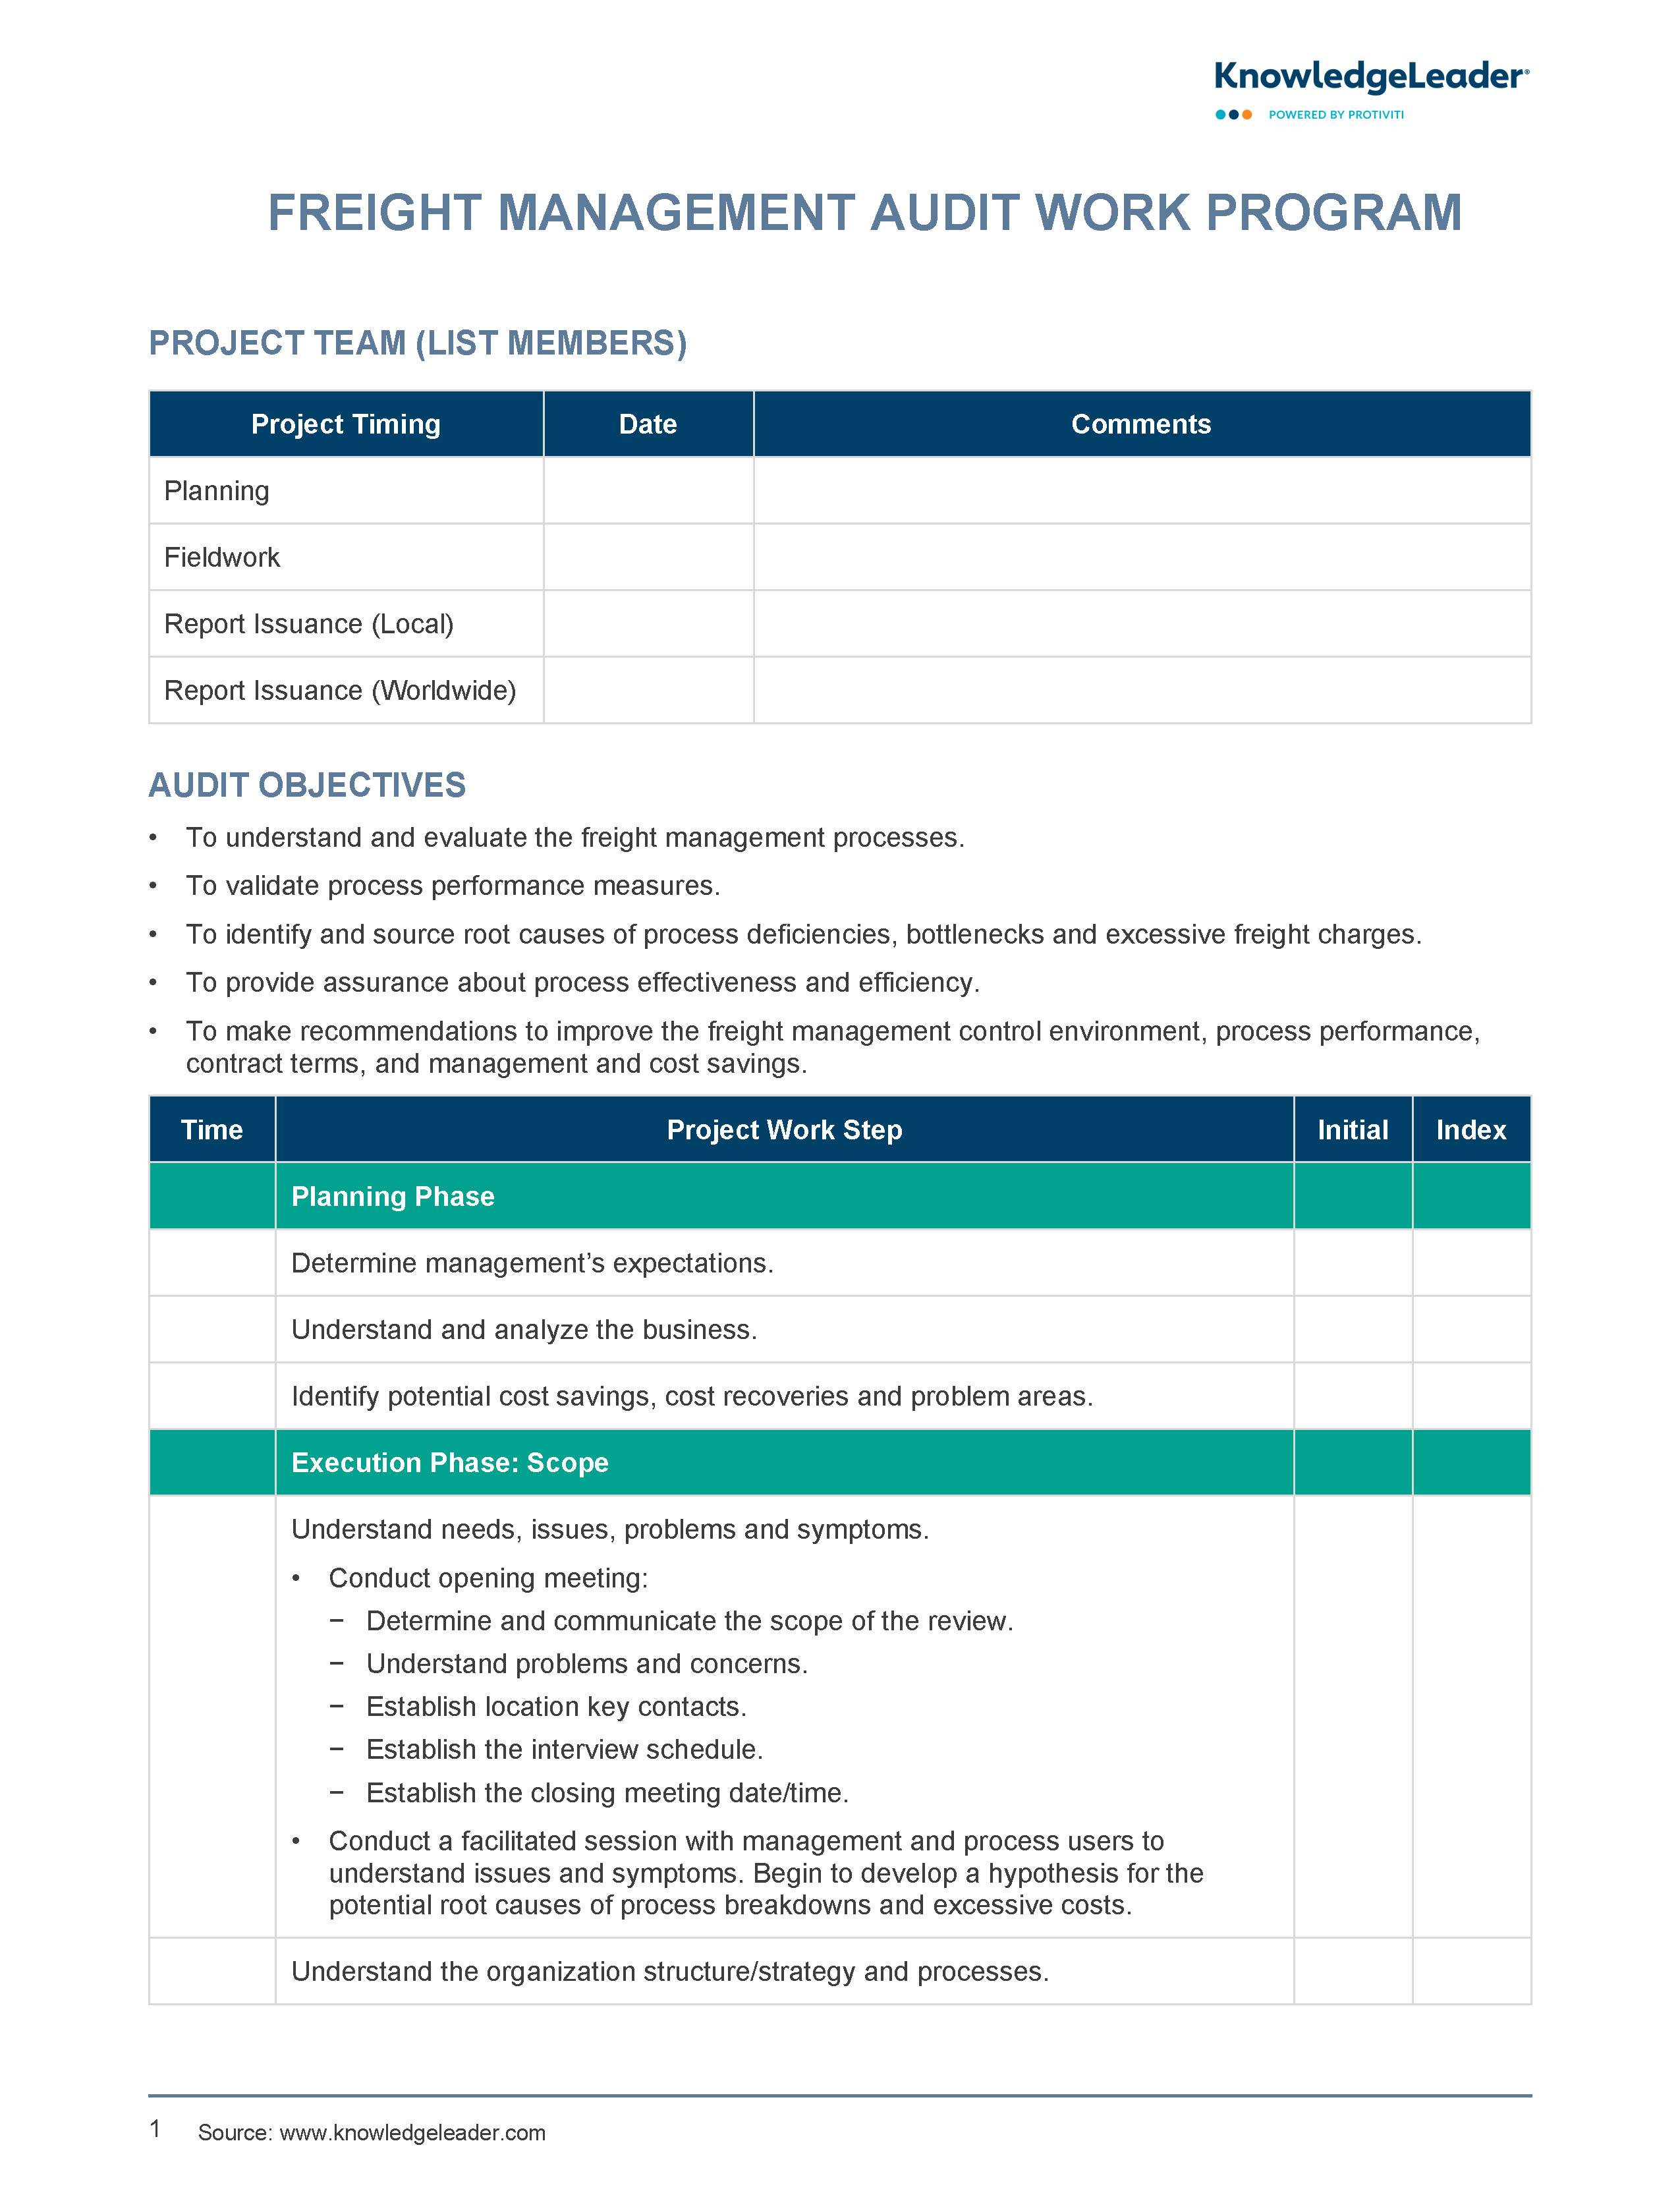 Screenshot of the first page of Freight Management Audit Work Program